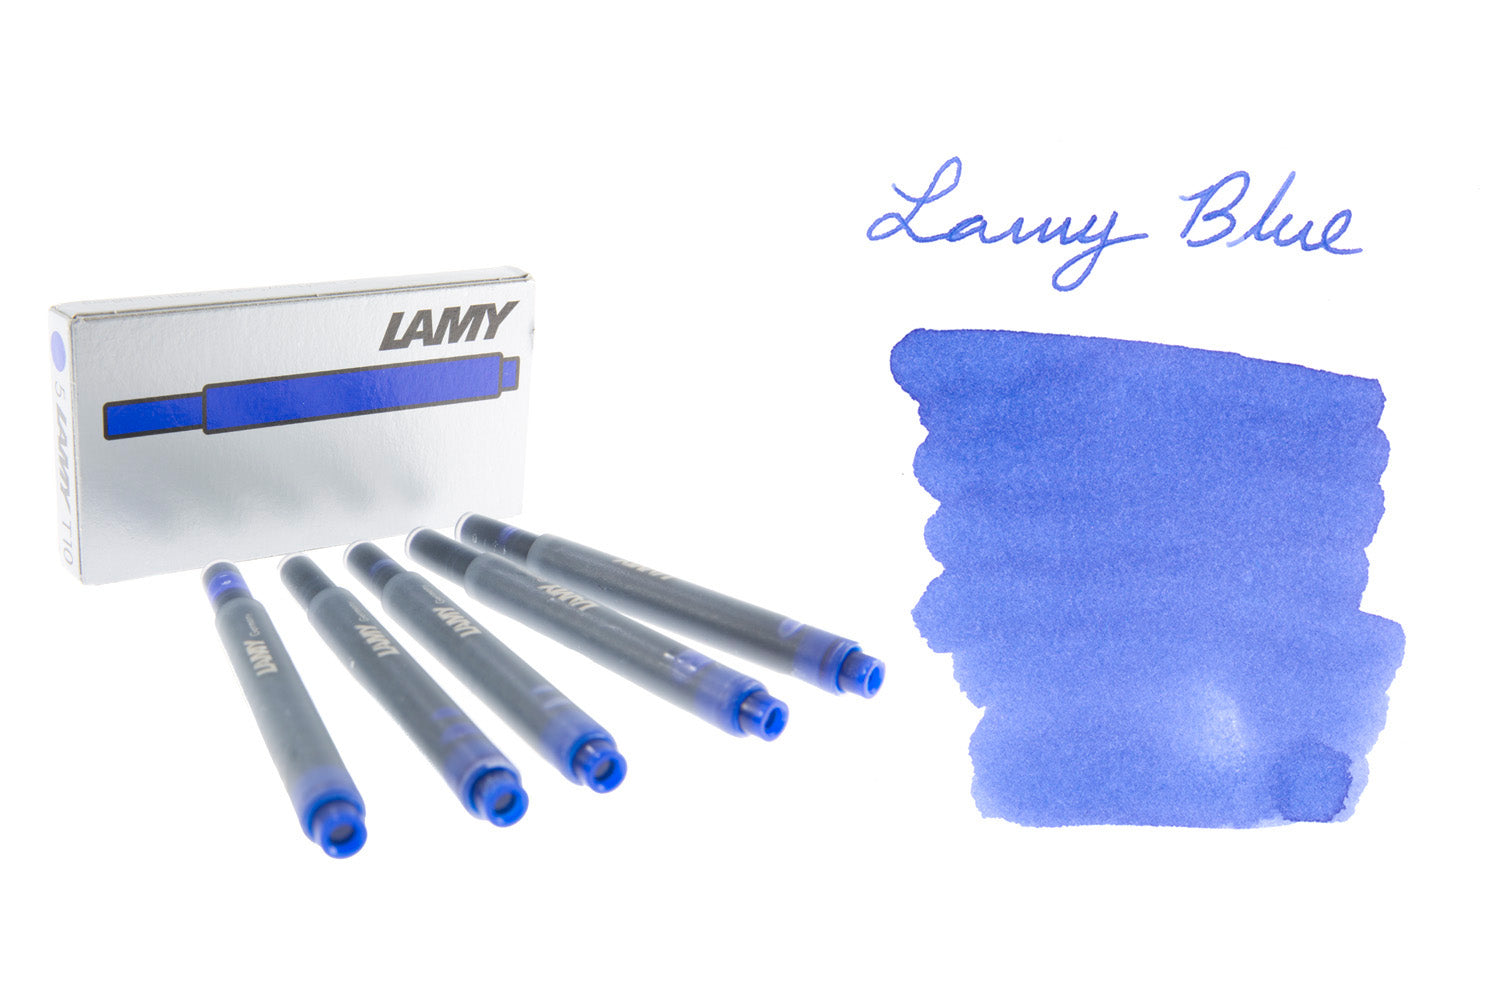 LAMY Blue fountain pen ink cartridges and swab